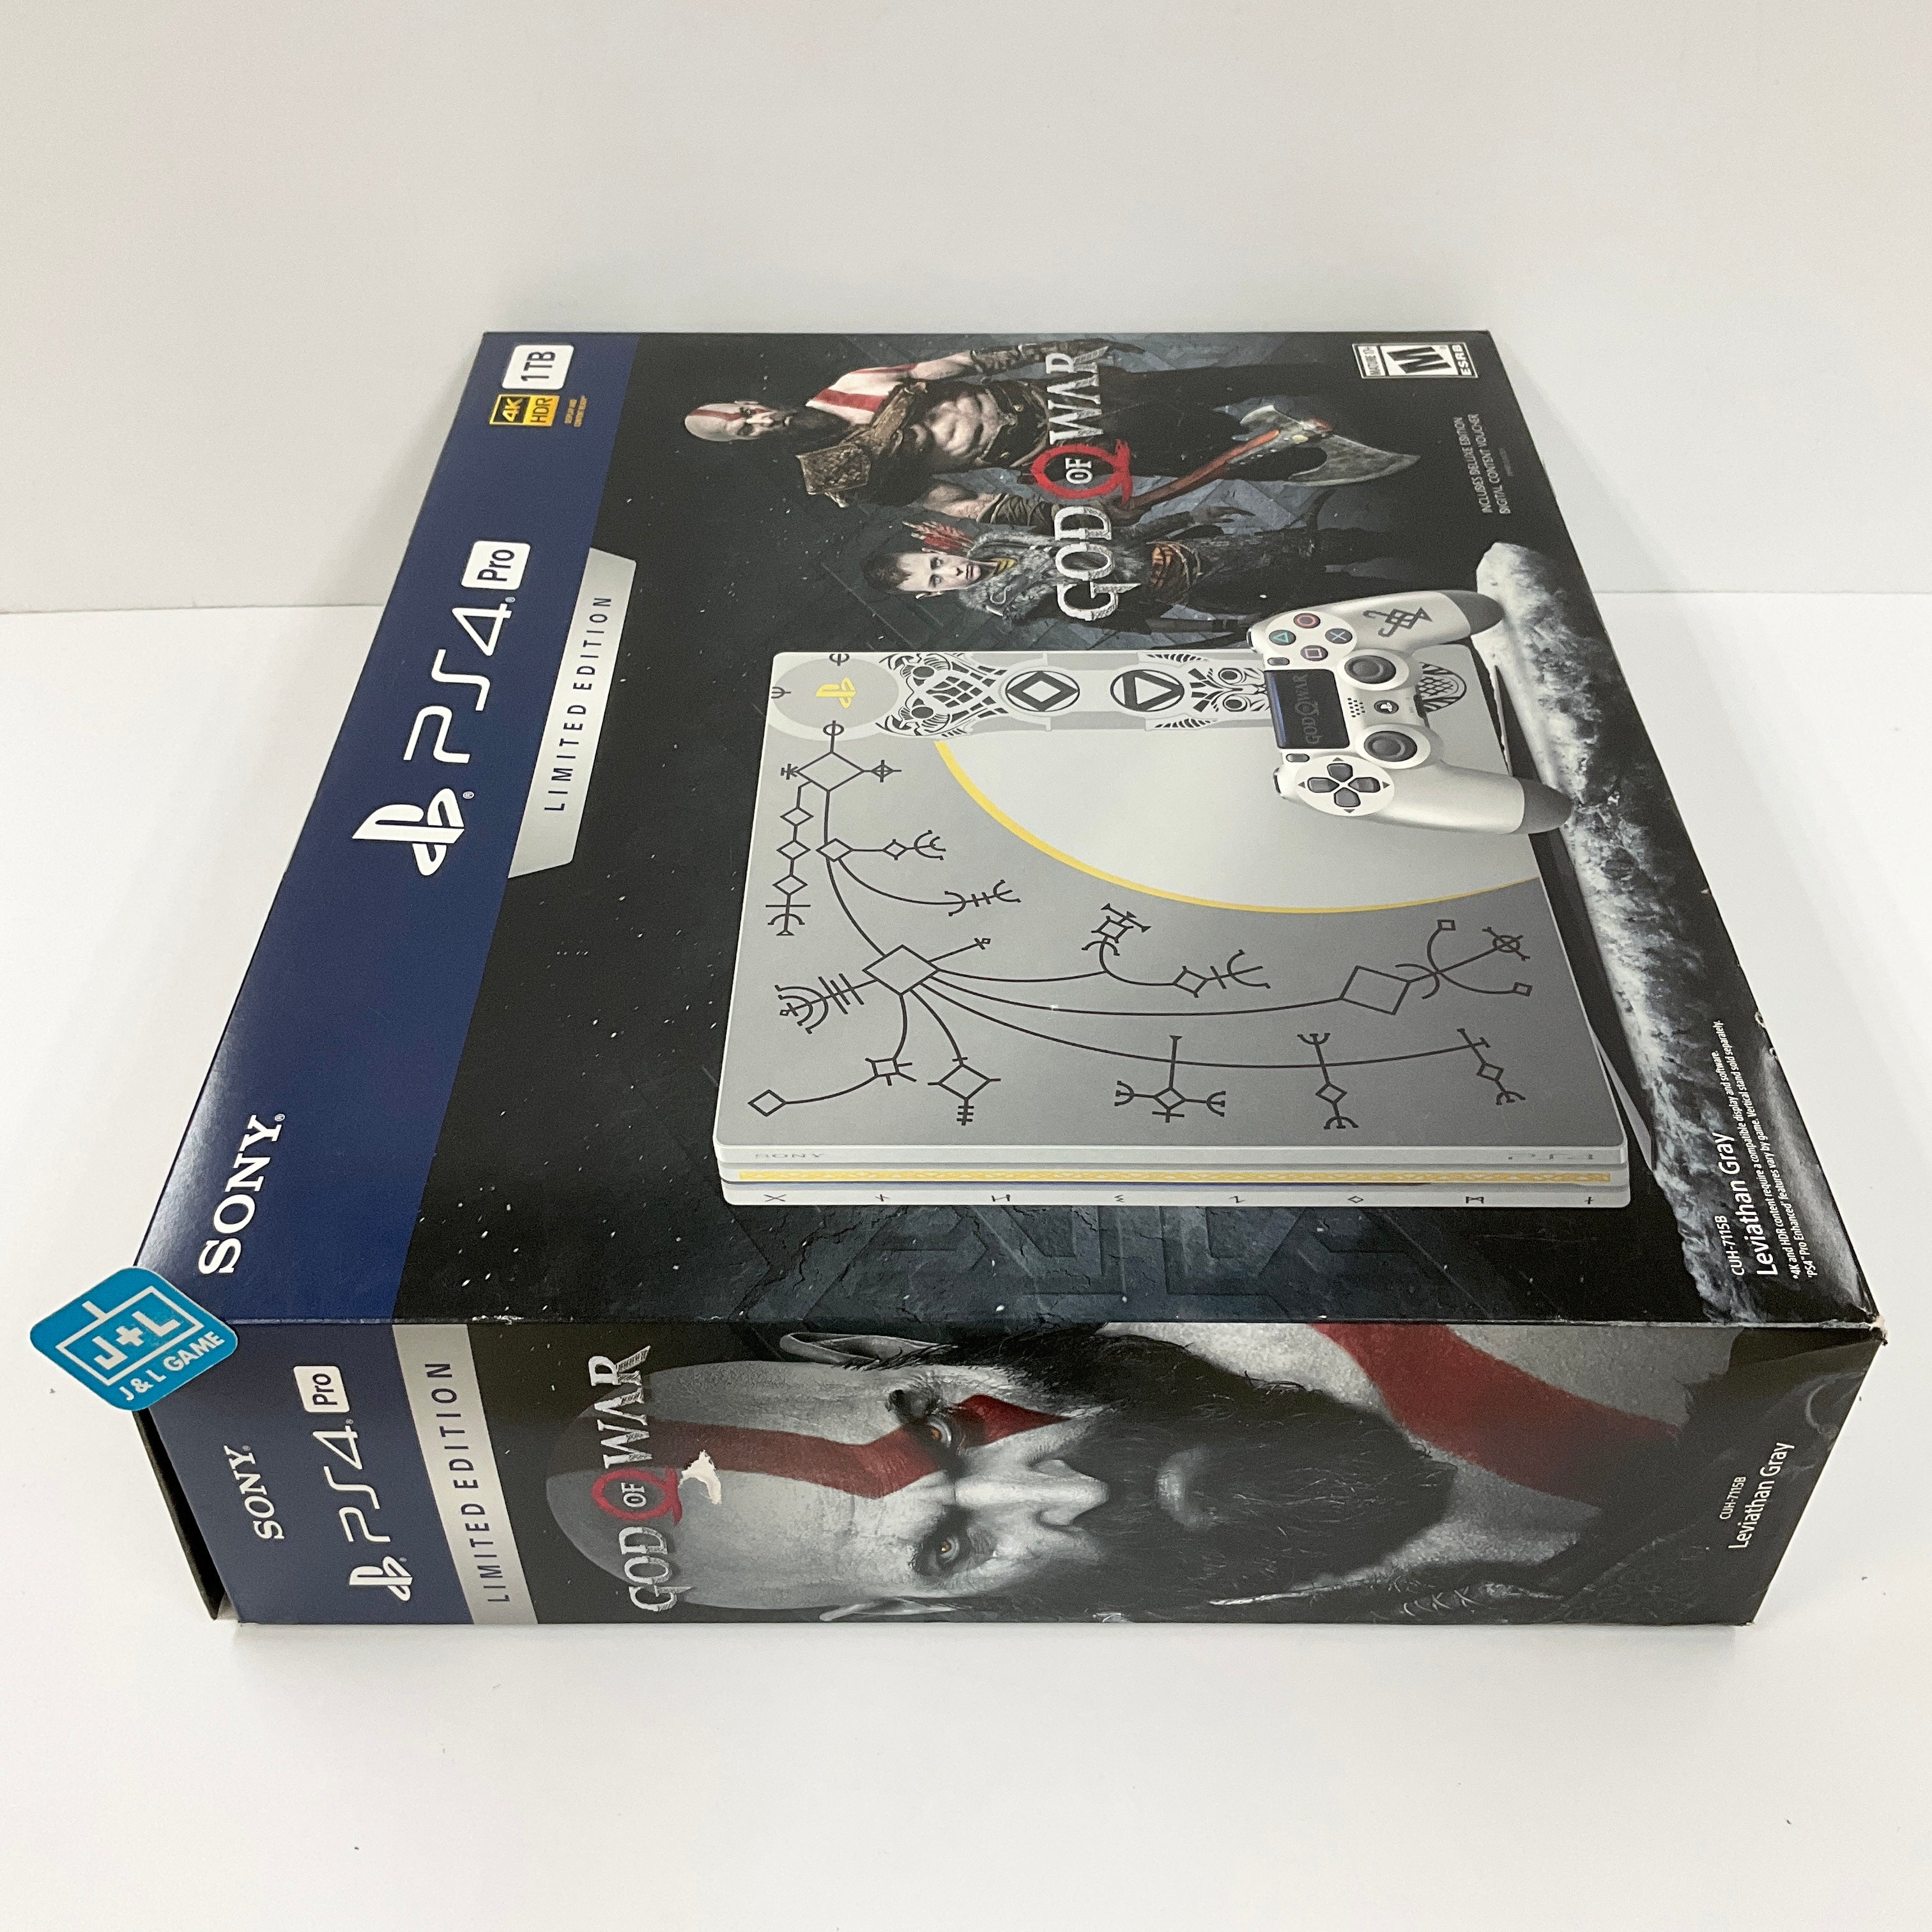 Sony PlayStation 4 Pro 1TB Limited Edition Console - God of War Bundle (US) - (PS4) Playstation 4 Consoles Sony   